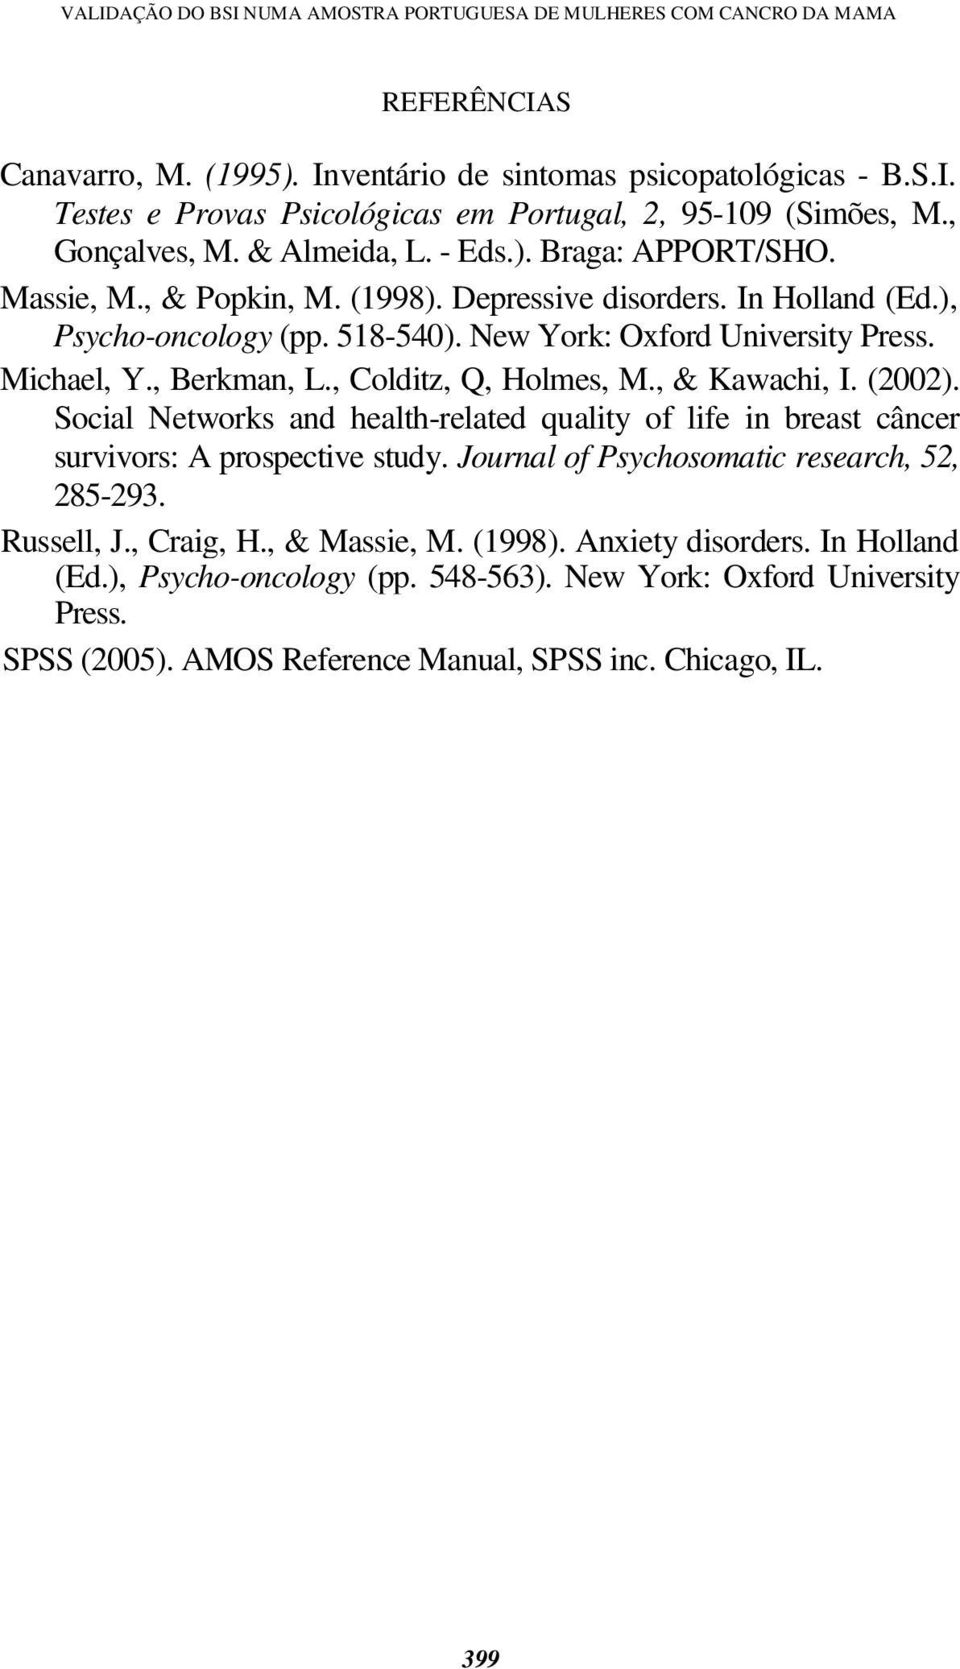 Michael, Y., Berkman, L., Colditz, Q, Holmes, M., & Kawachi, I. (2002). Social Networks and health-related quality of life in breast câncer survivors: A prospective study.